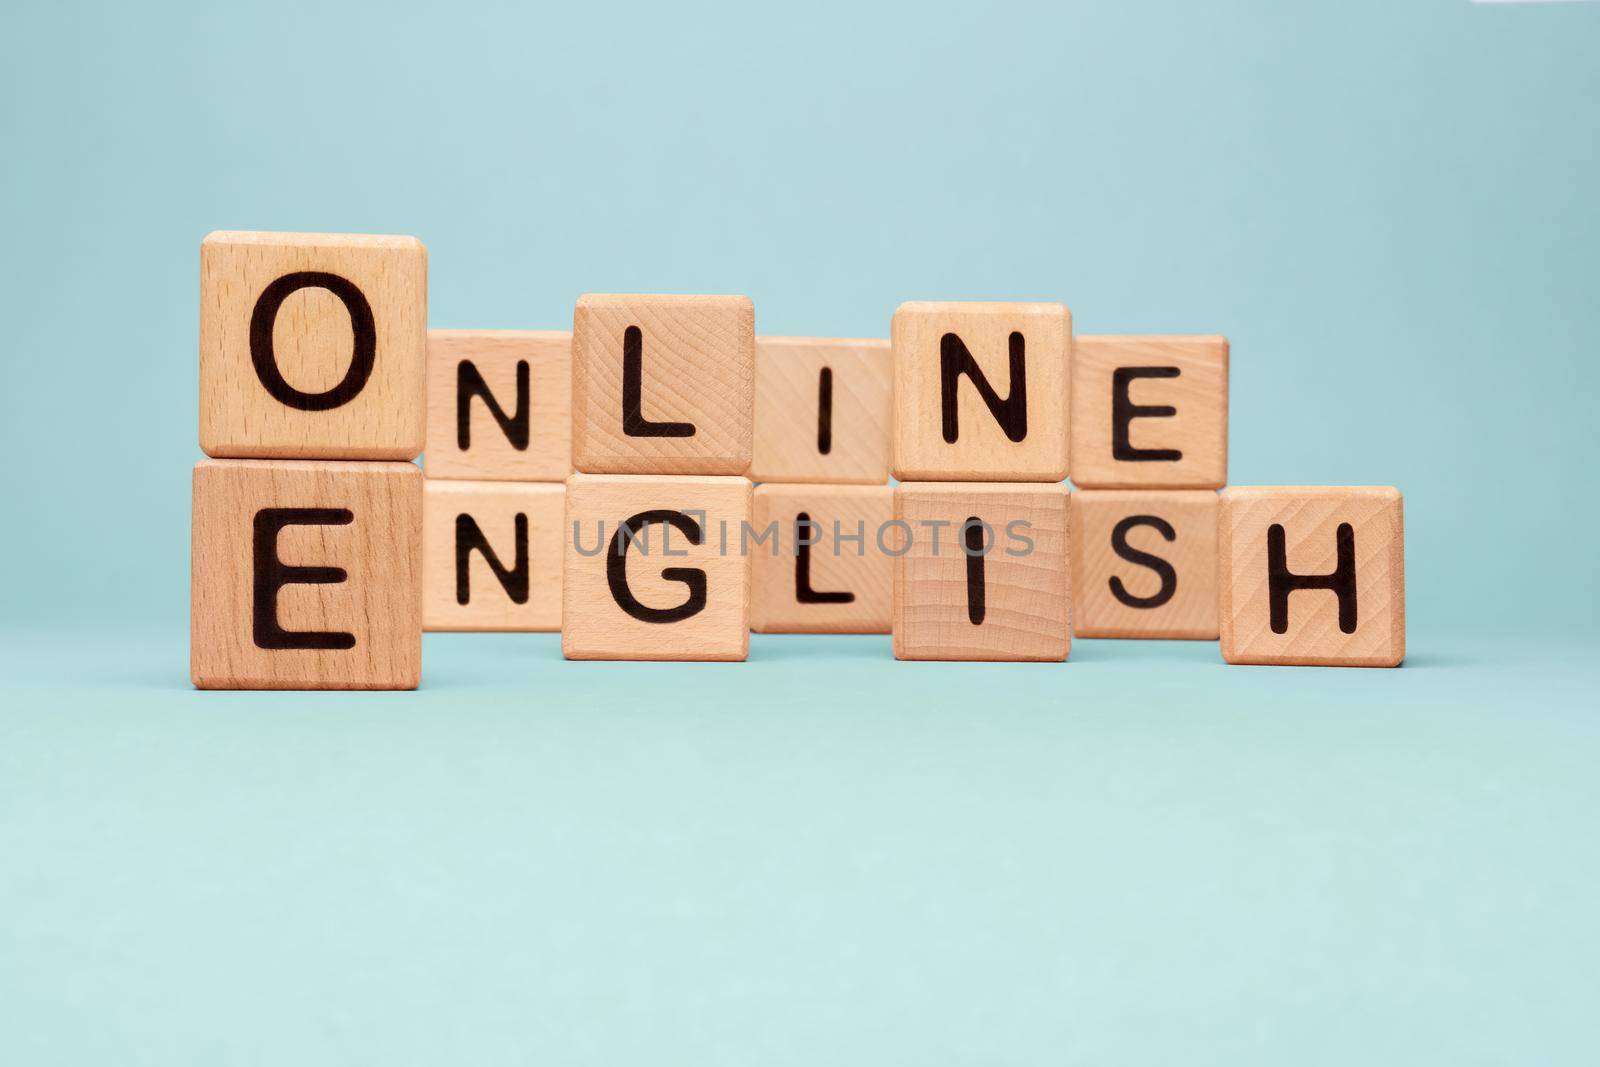 Learning Online English words block wooden cubes concept language course. Speak English Online course icon wooden blocks concept foreign language tutoring. Word Online English letters blocks toy cubes